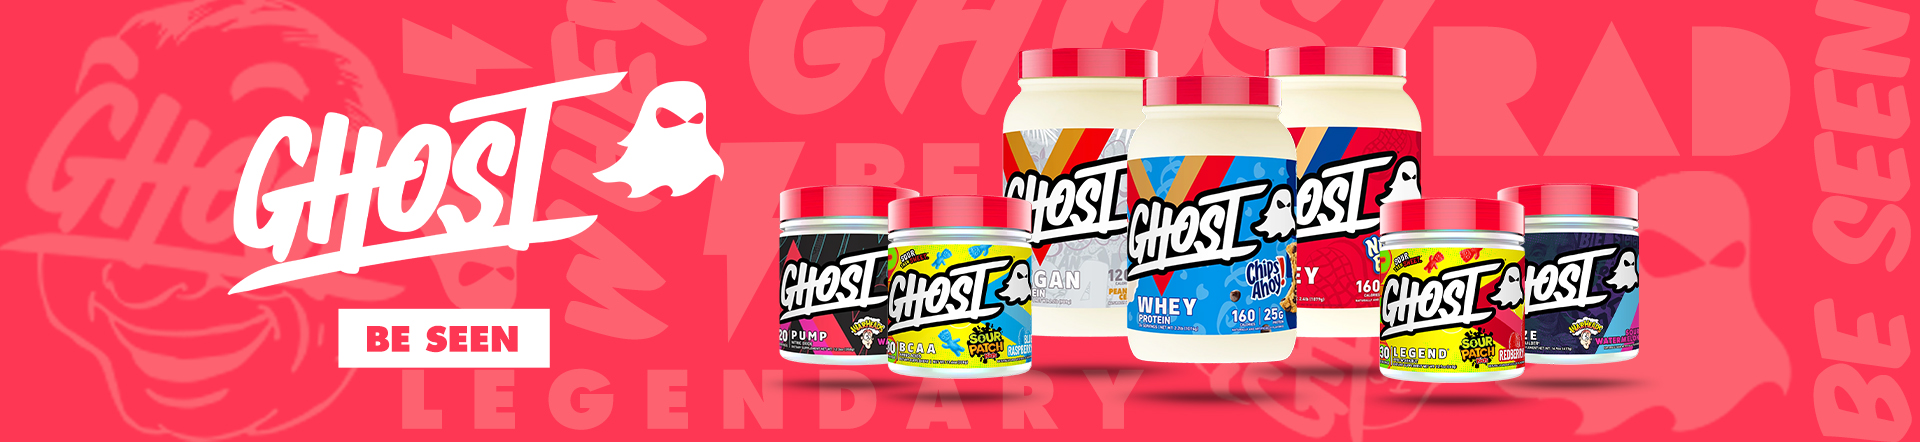 Ghost Supplements Lifestyle BCAA Size Vegan Protein PreWorkout